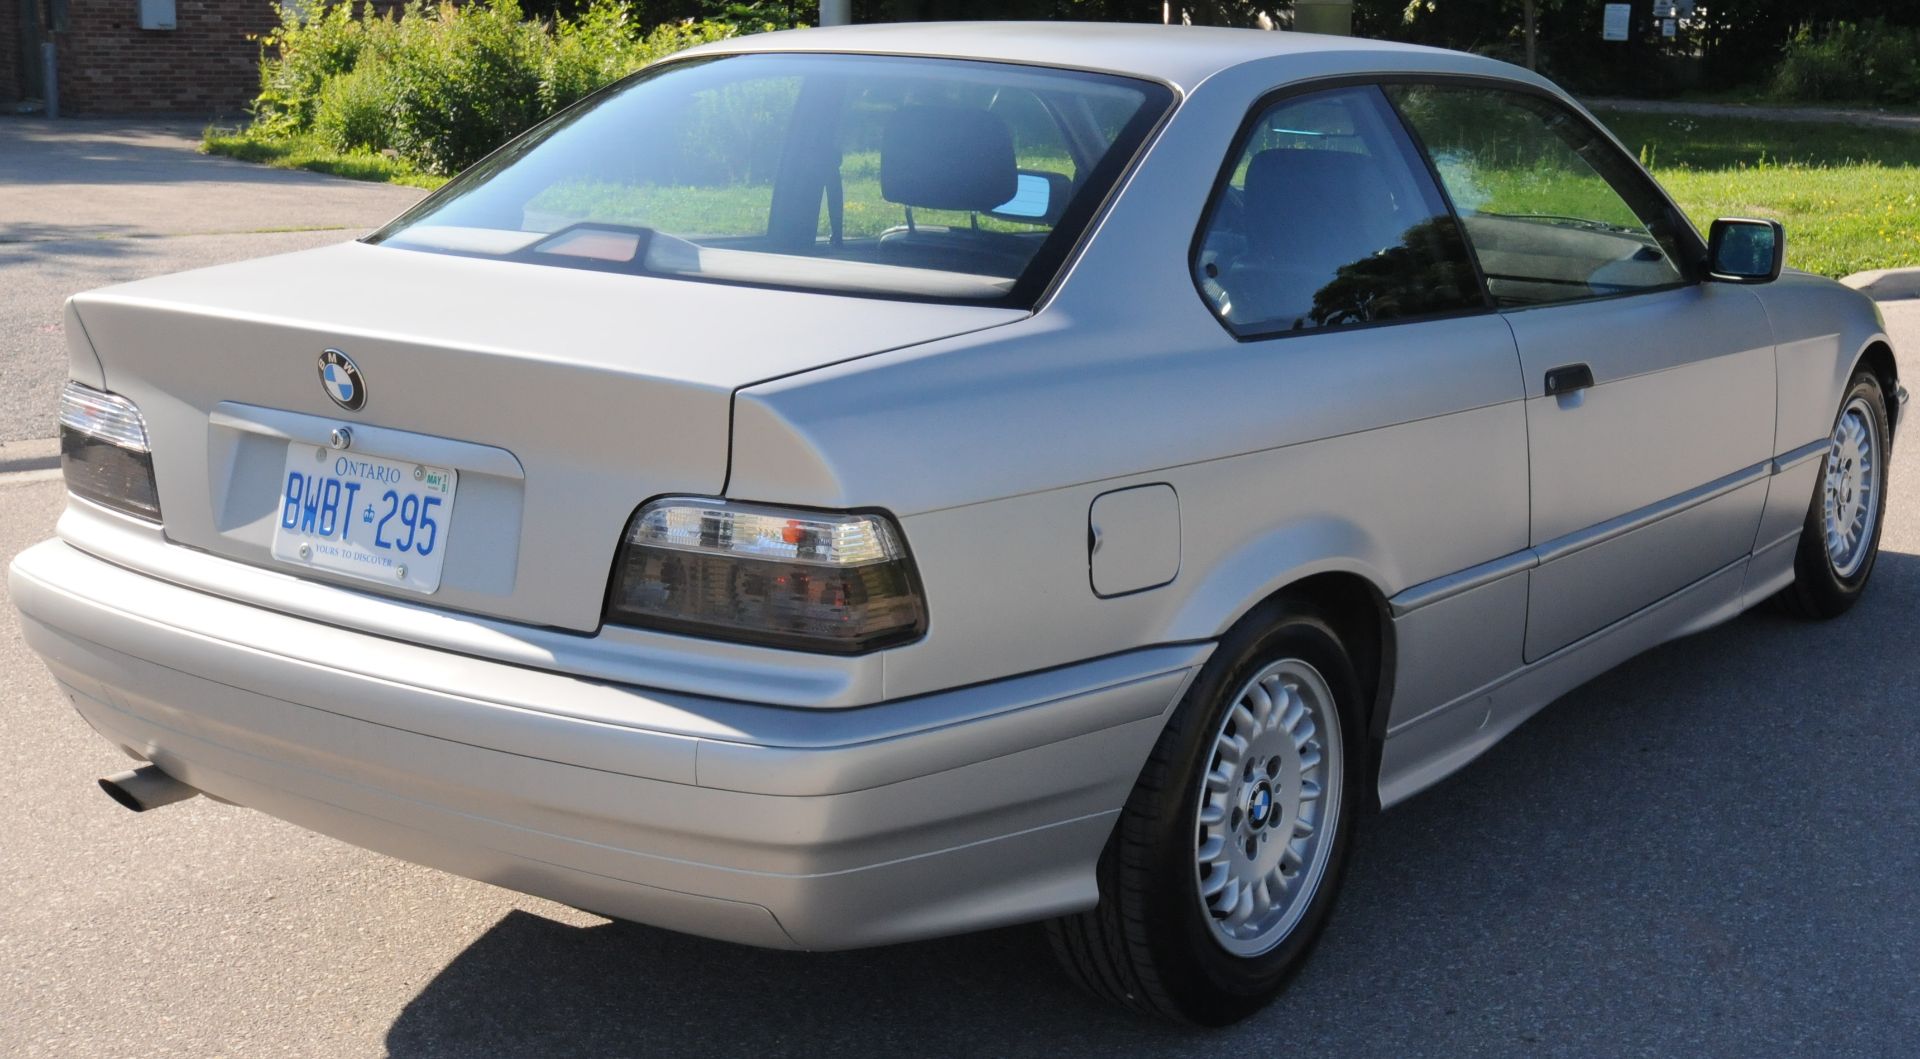 BMW (1993) E36 316IS COUPE WITH 1.8L VANOS VVT ENGINE, 5 SPEED MANUAL TRANSMISSION, REAR WHEEL - Image 3 of 5